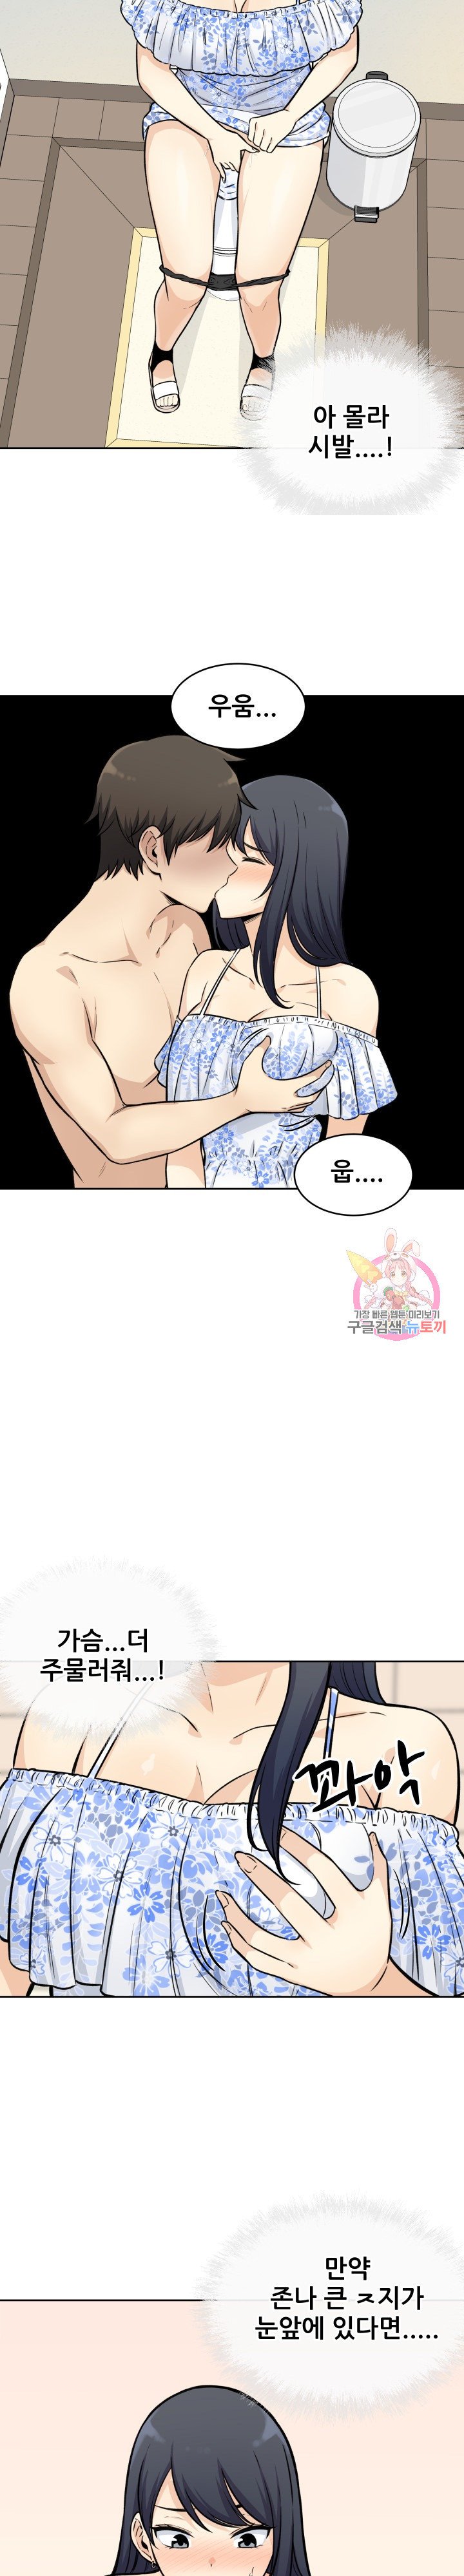 the-ark-is-me-raw-chap-36-10